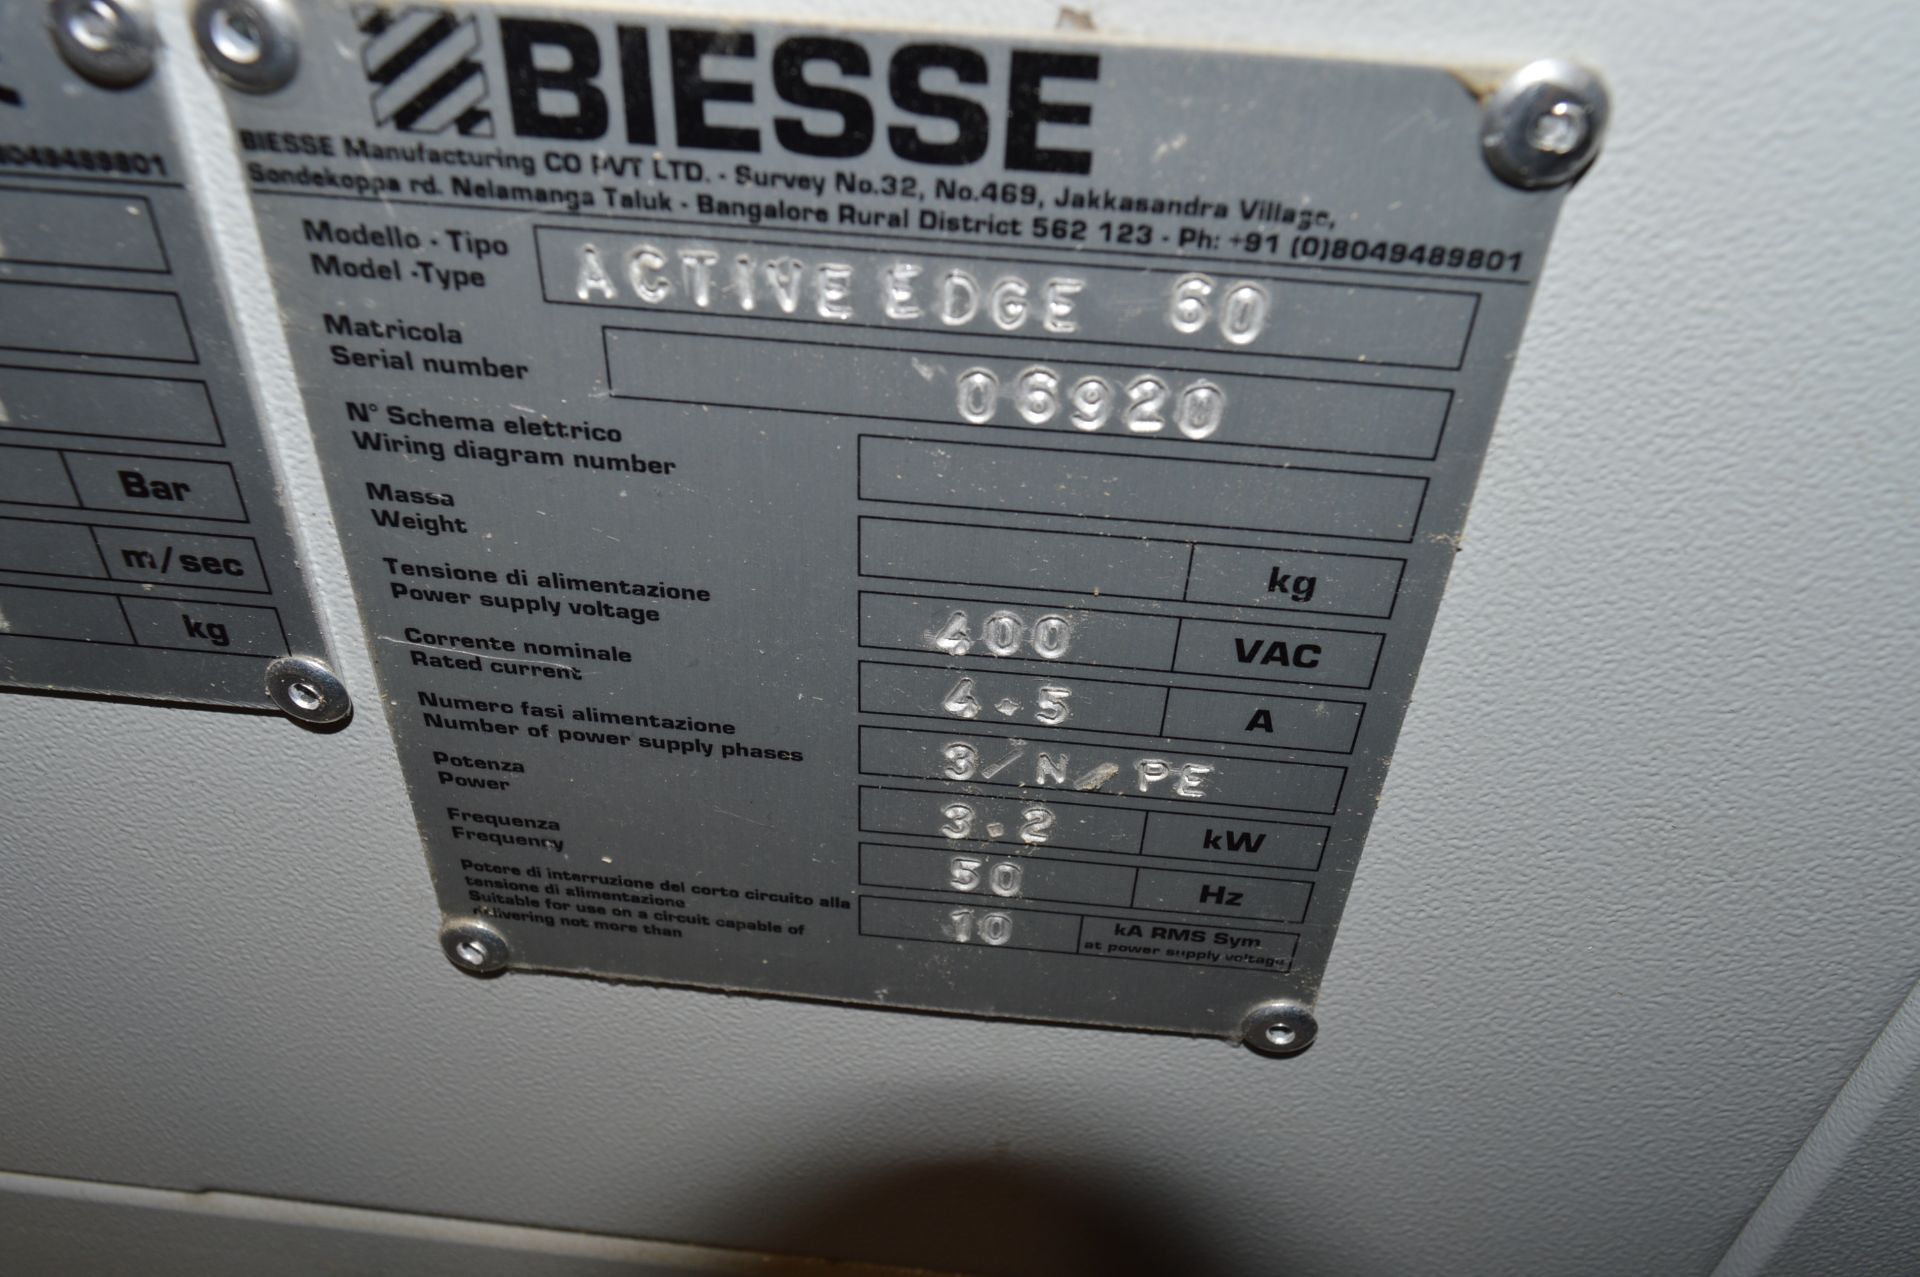 Biesse Active Edge 60 single sided edge bander, Serial No. 06920 (2015). Weight: 250 kg; table size: - Image 5 of 5